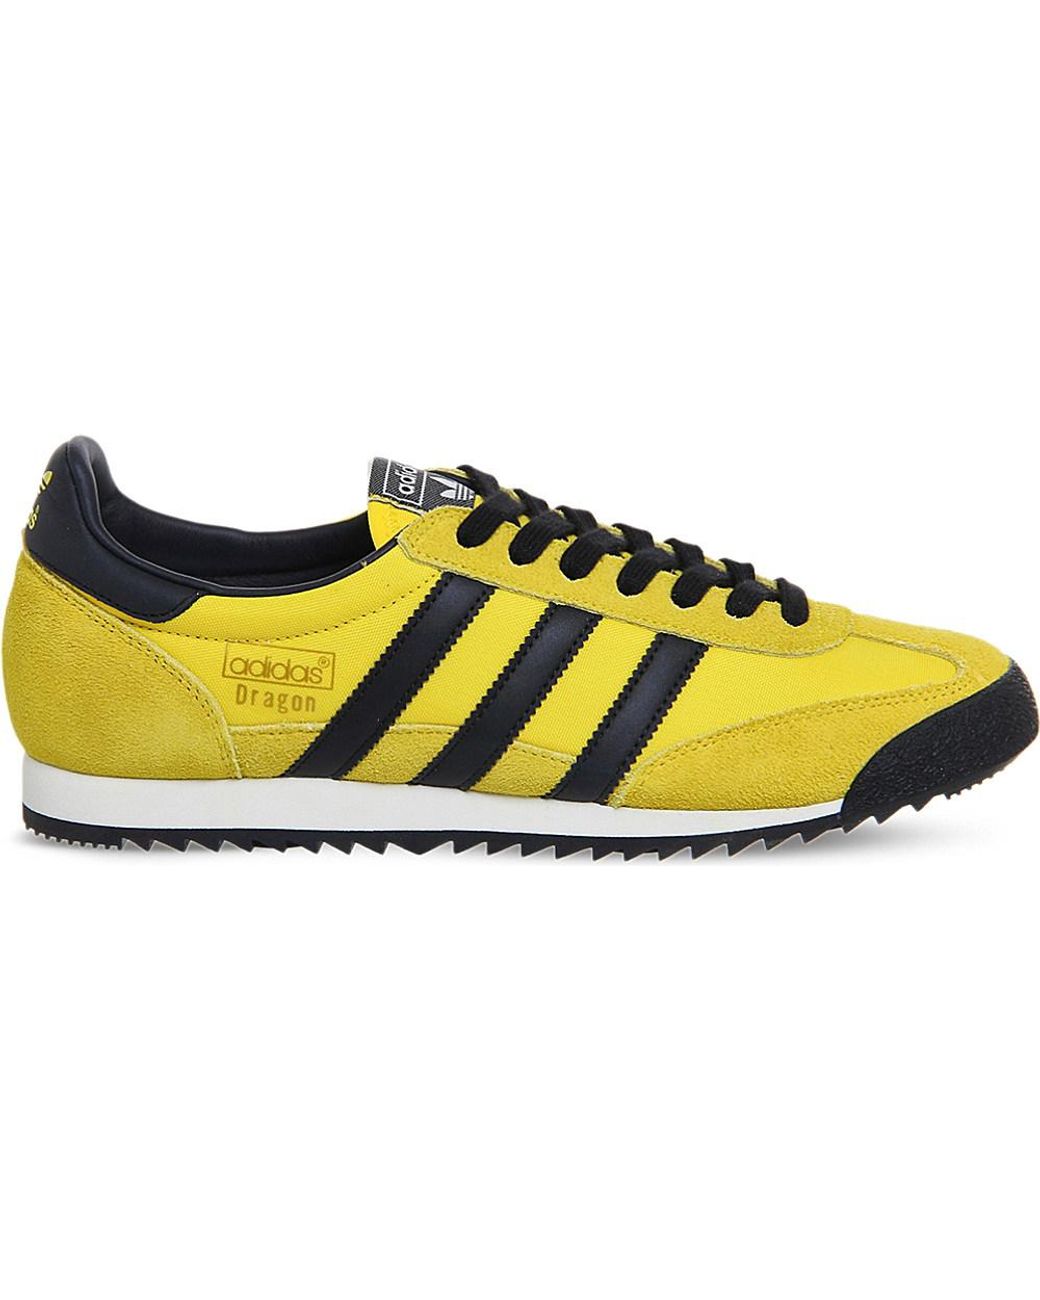 adidas Originals Suede Dragon Vintage Trainers in Yellow Black White  (Yellow) for Men | Lyst